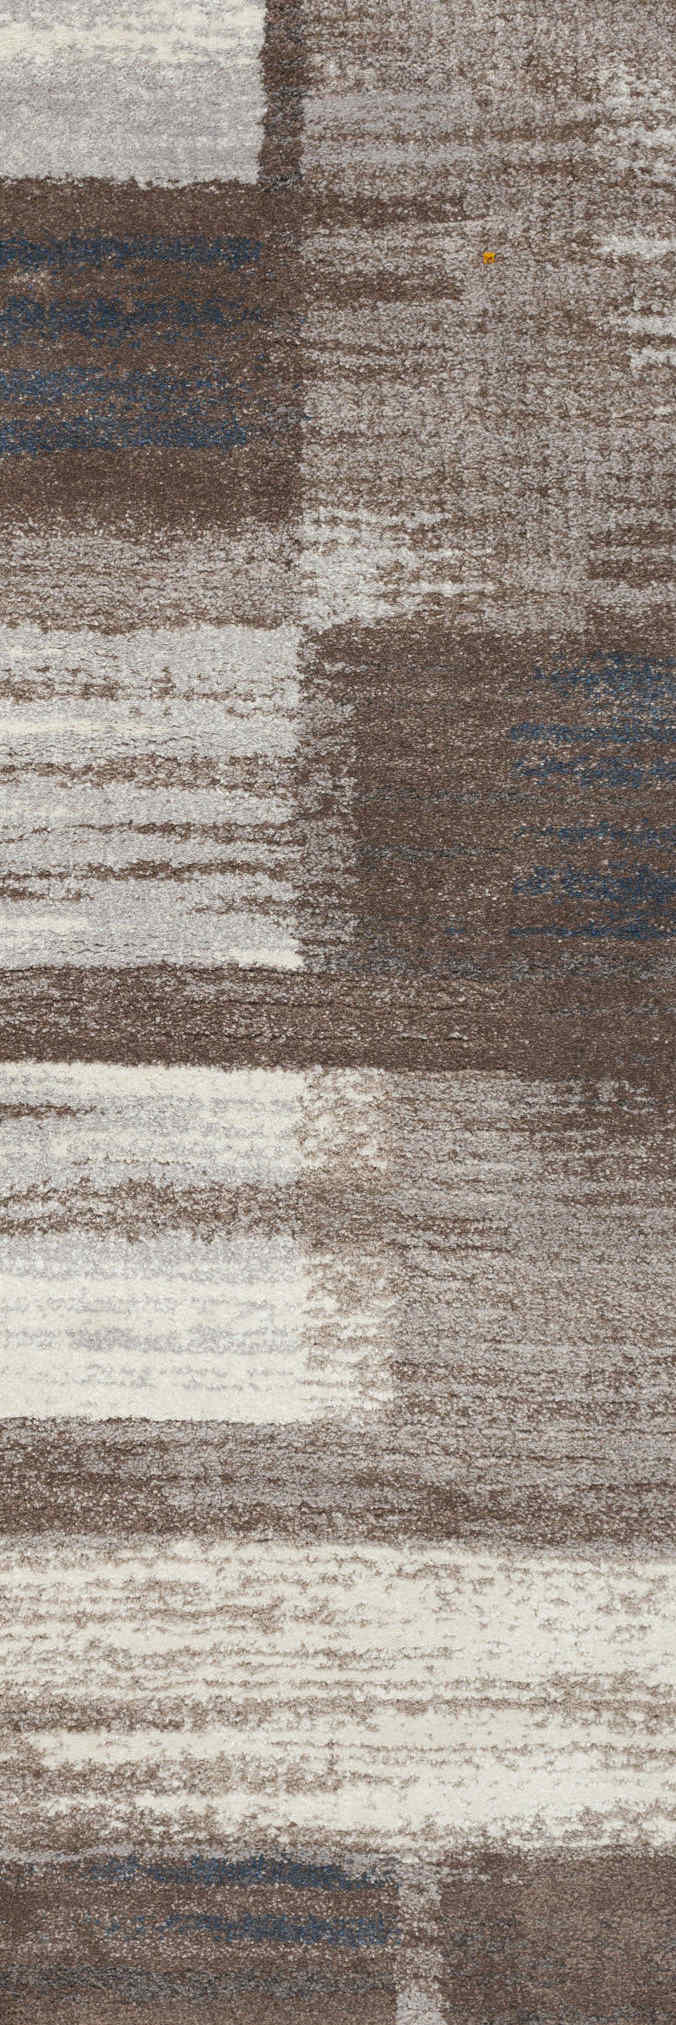 Central Oriental Area Rugs 2.2x7.6 Structure Area Rug 6256 CPA Grey Brown 13 Sizes